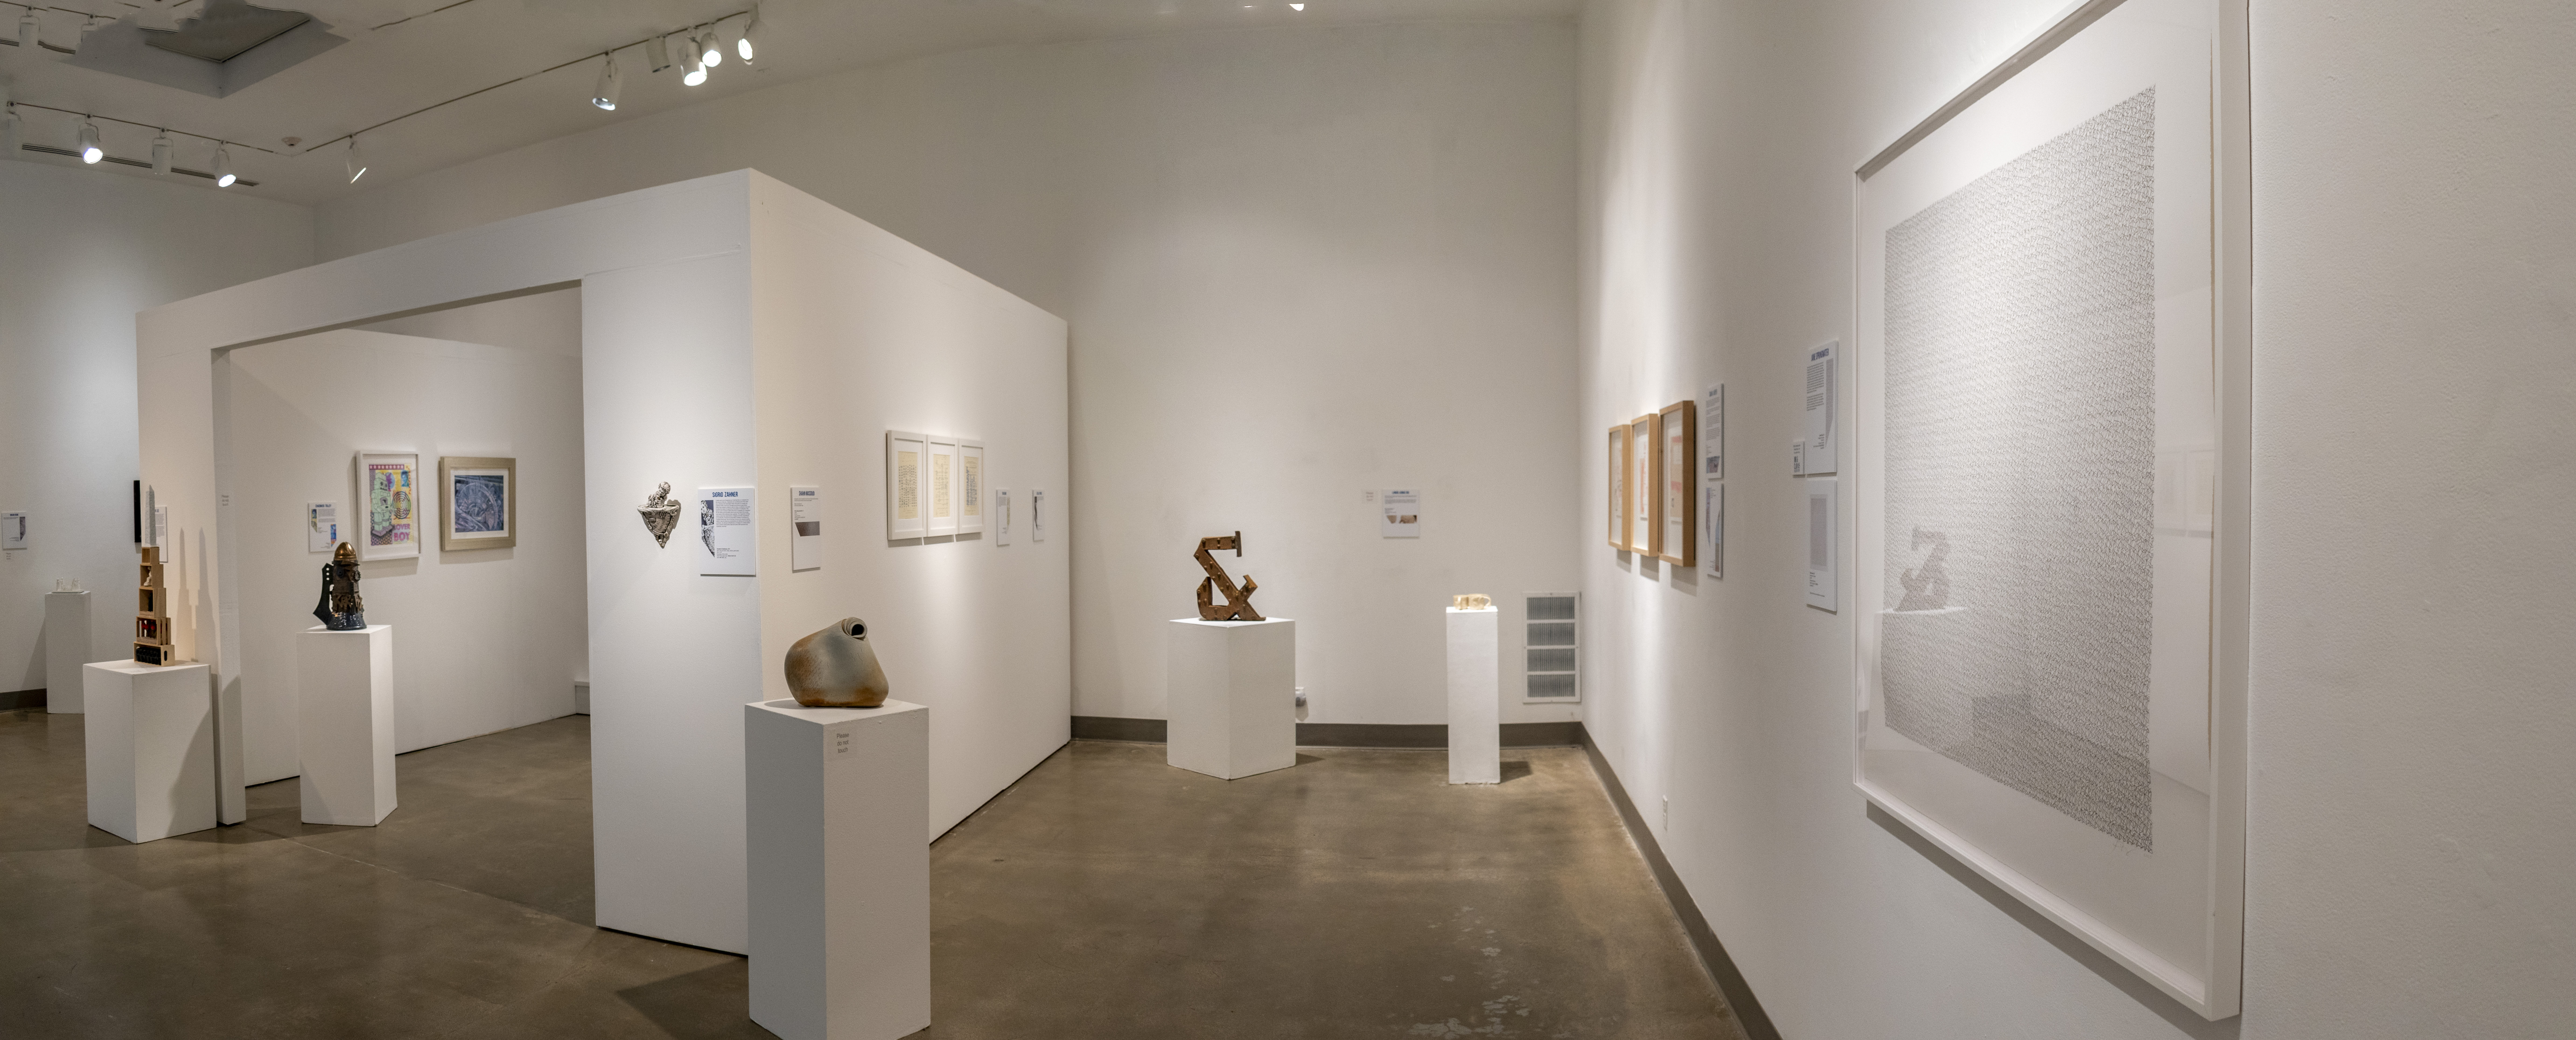 Installation View, West Gallery, Ink & Clay 45 Exhibition, August 18, 2022 to November 17, 2022